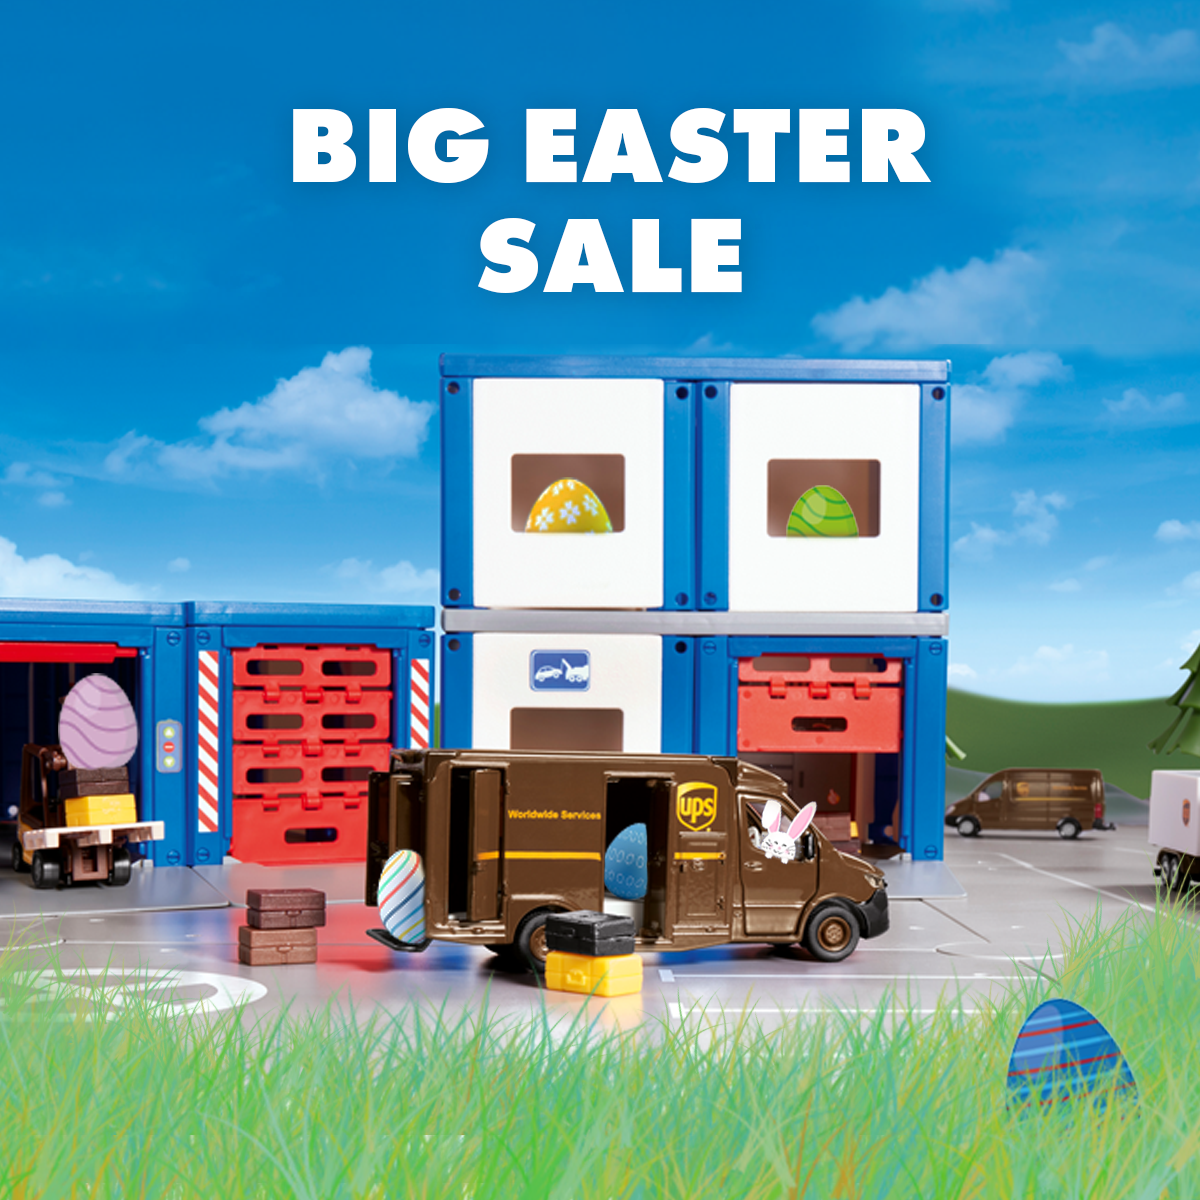 High discounts for Easter